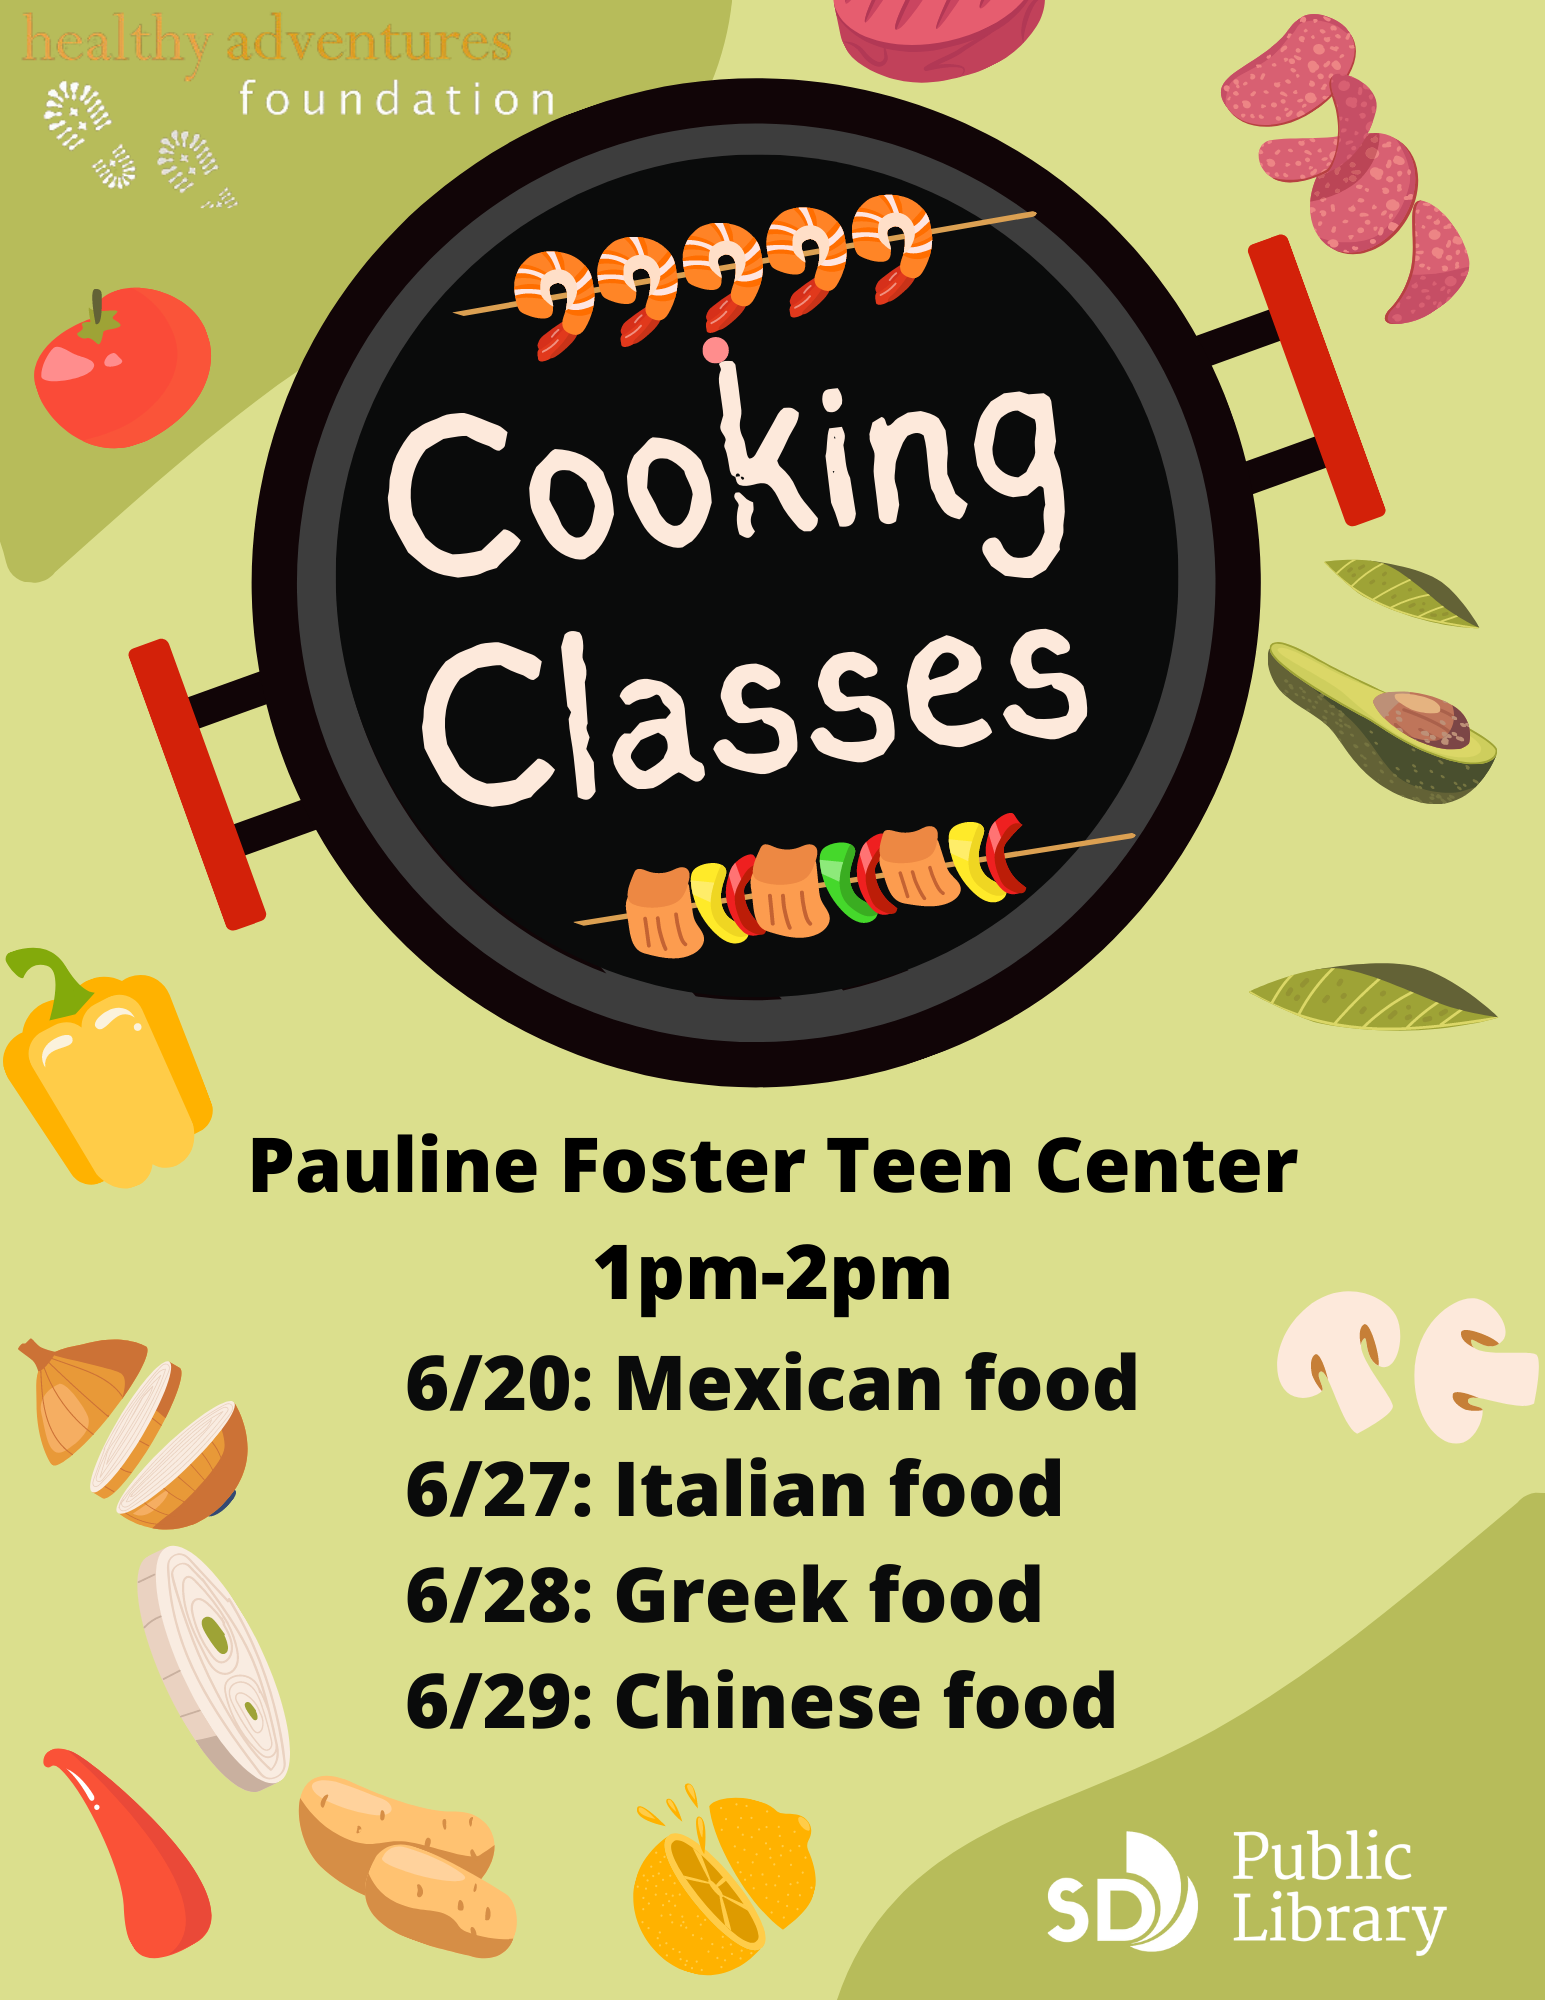 Cooking Classes flyer